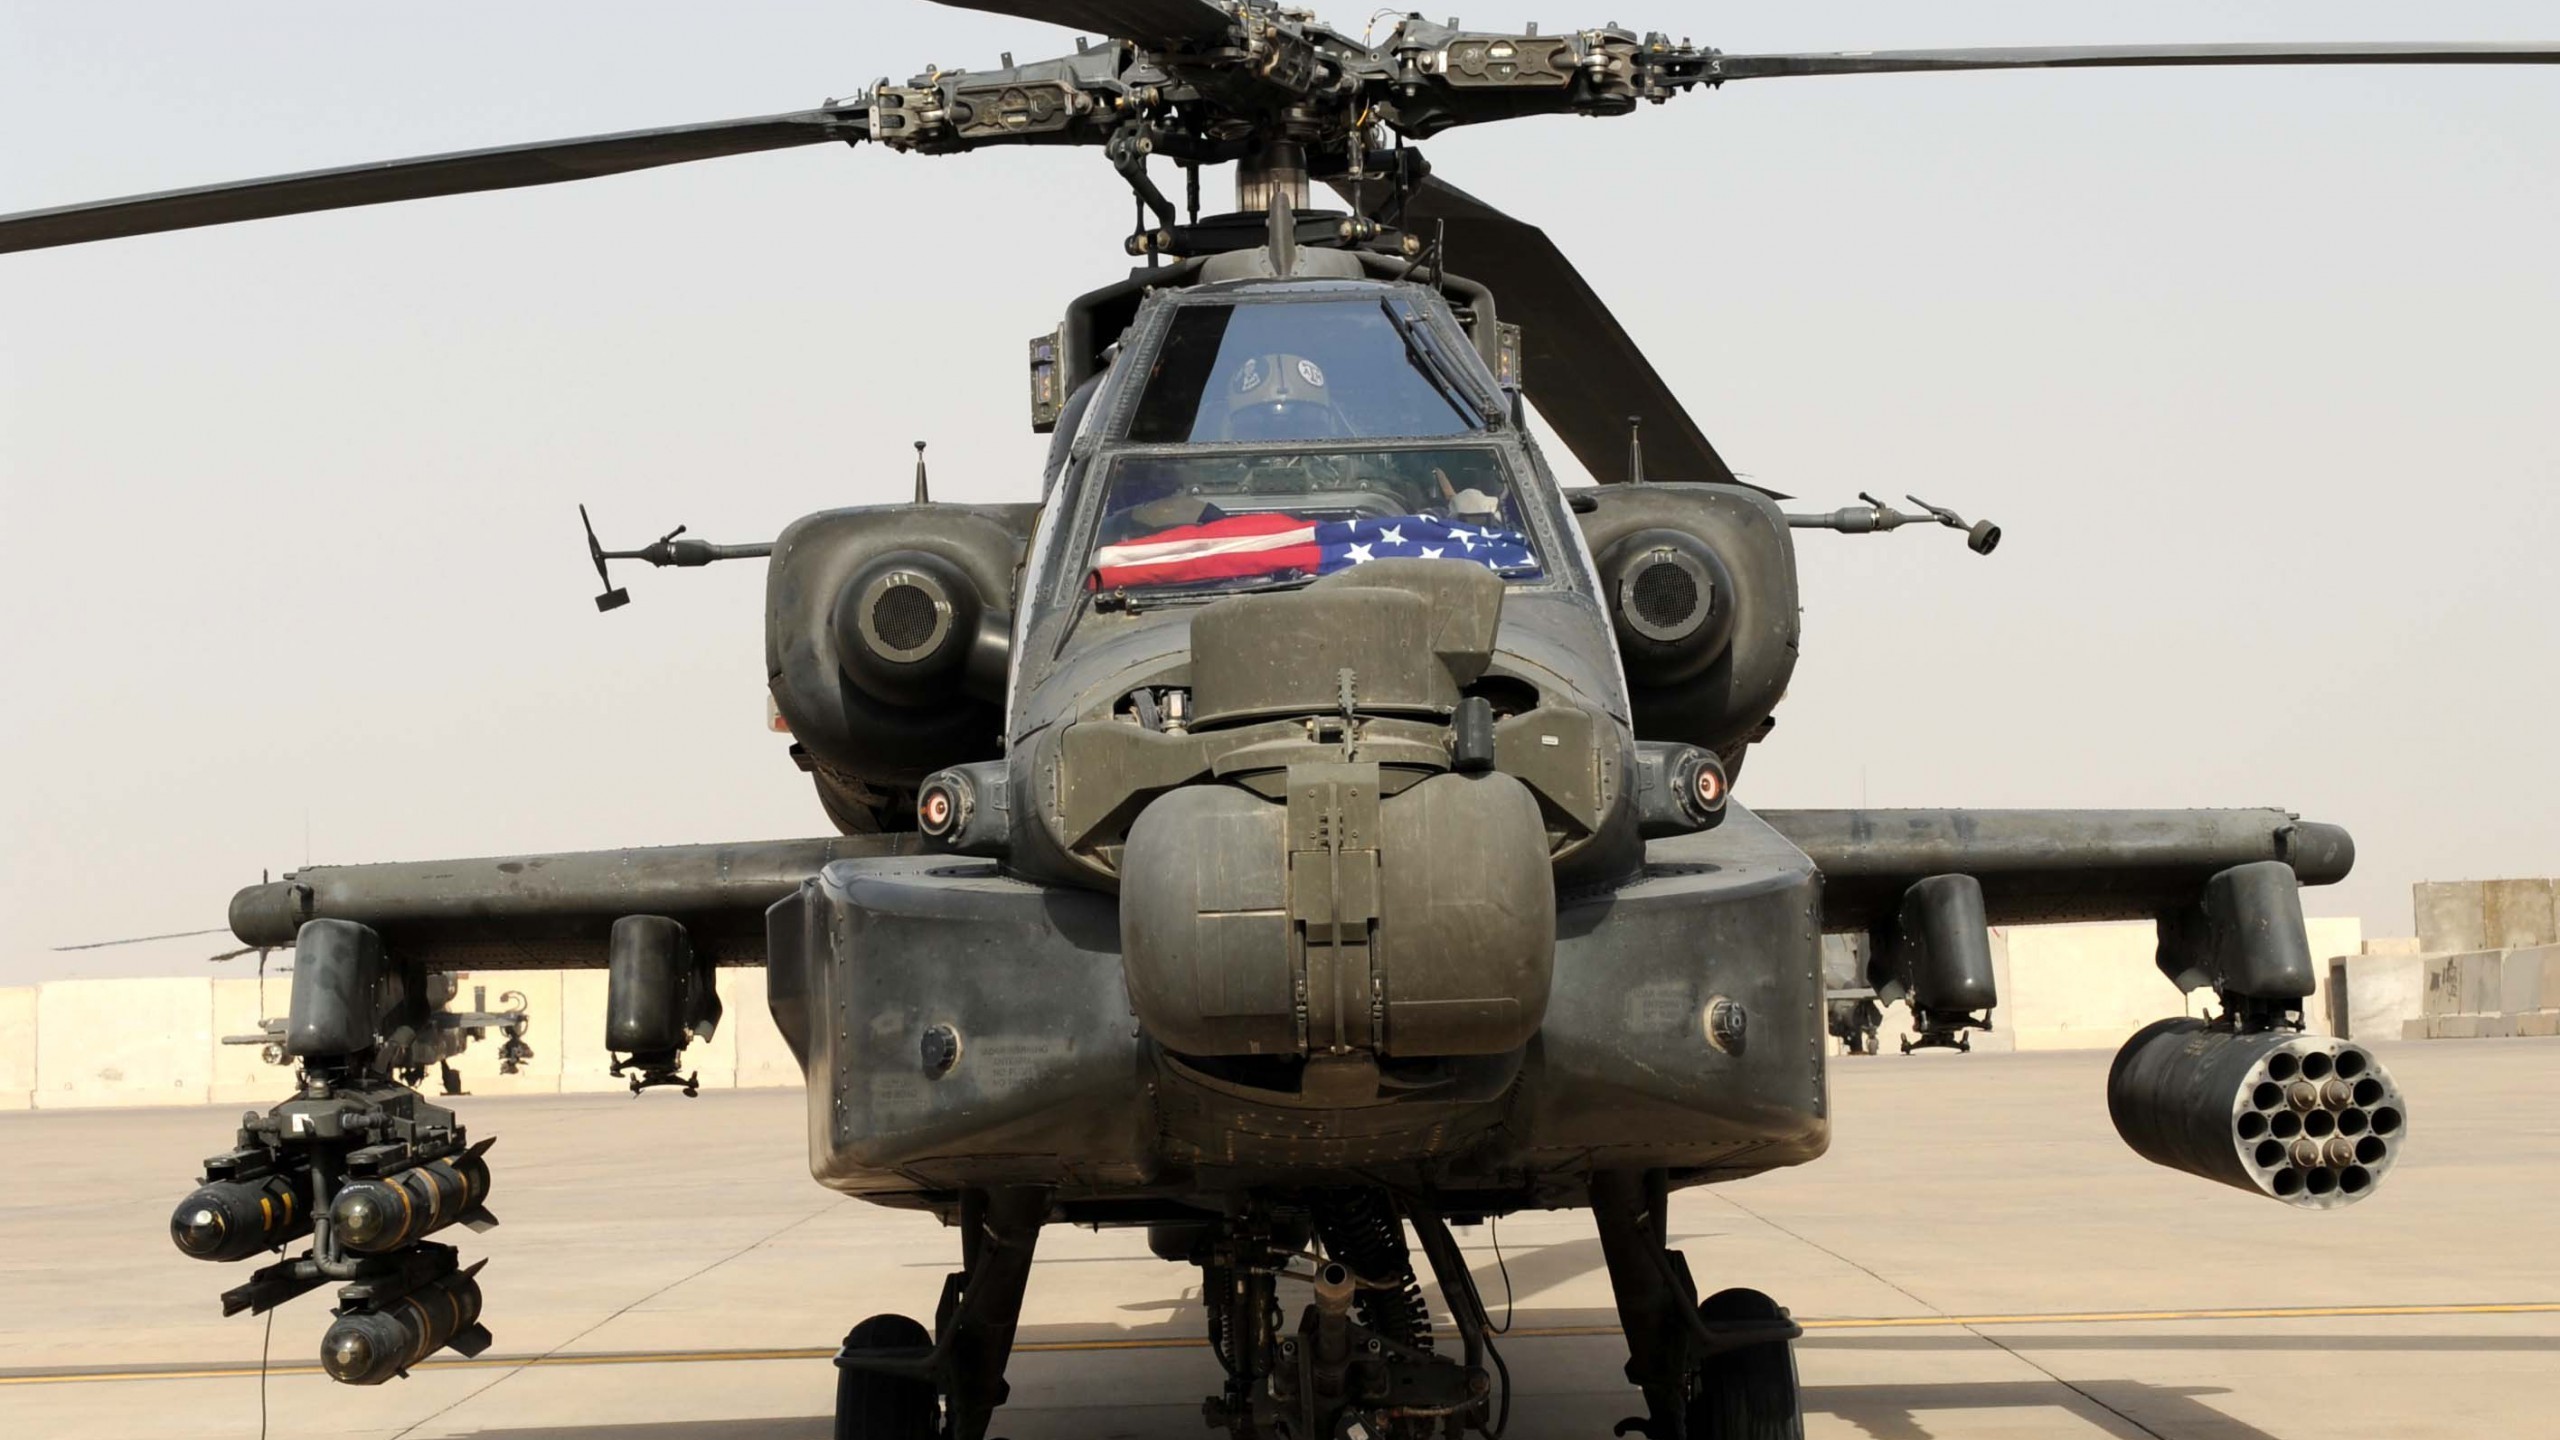 2560x1440 Army apache military helicopters chopper us ah-64 wallpaper